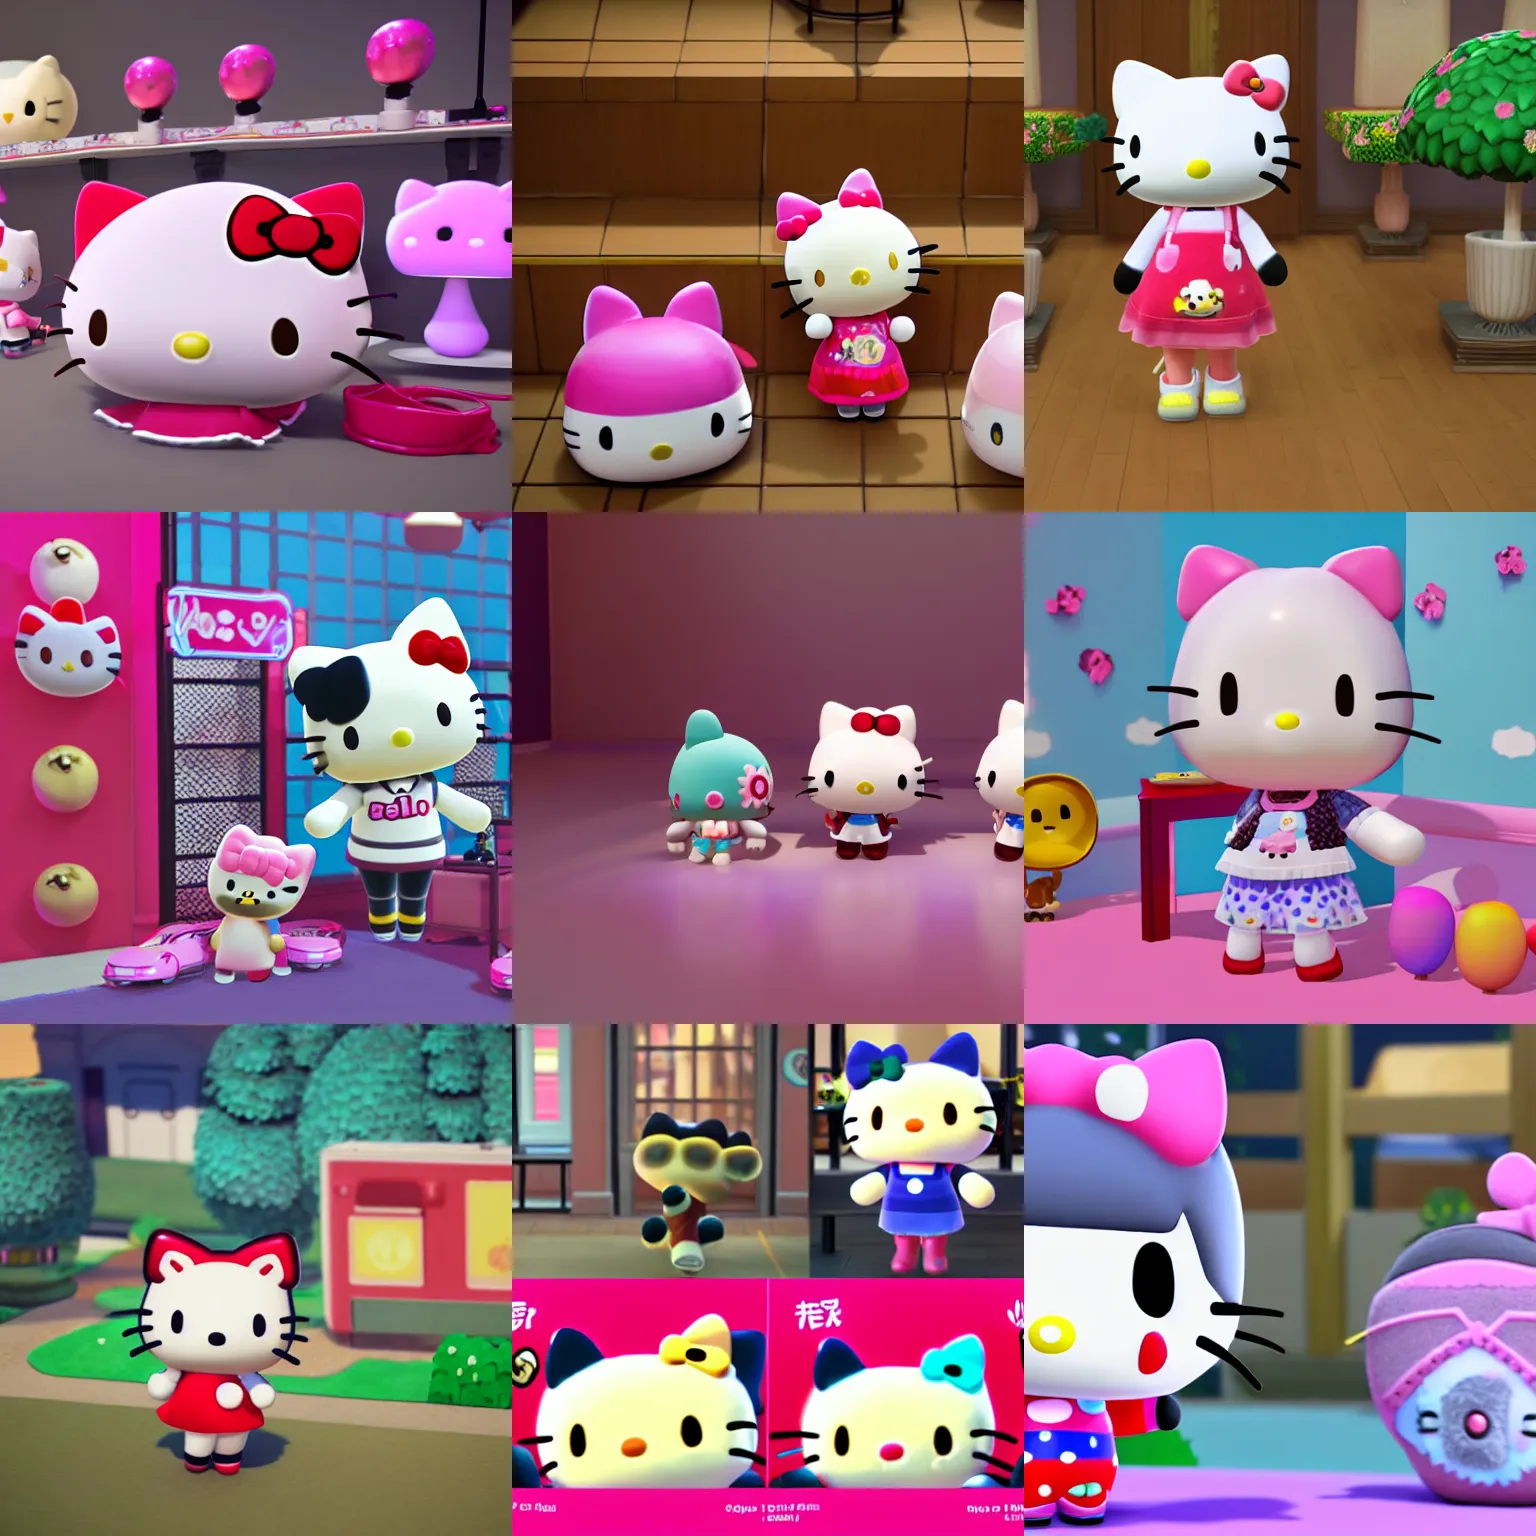 Hello Kitty, My Melody, Kuromi - Main Sanrio Characters - v1.0 Intial  Release, Stable Diffusion LoRA